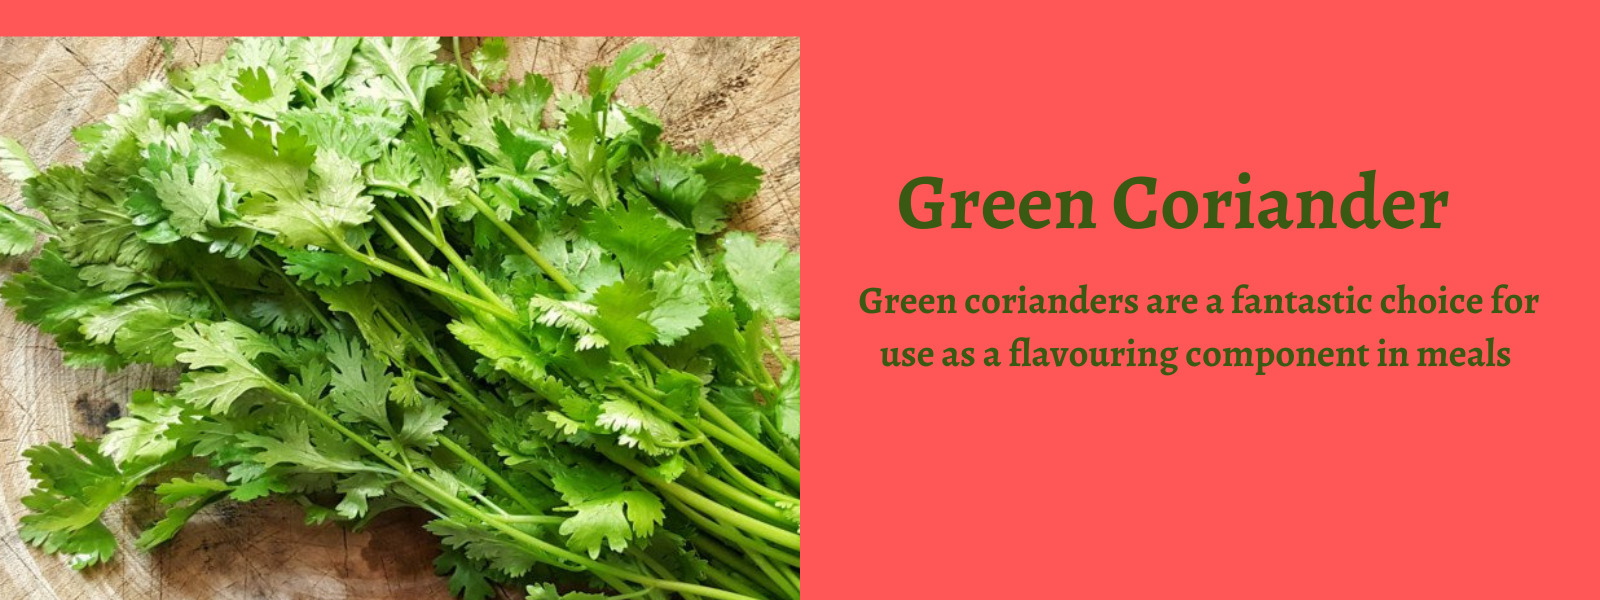 Green Coriander- Health Benefits, Uses and Important Facts